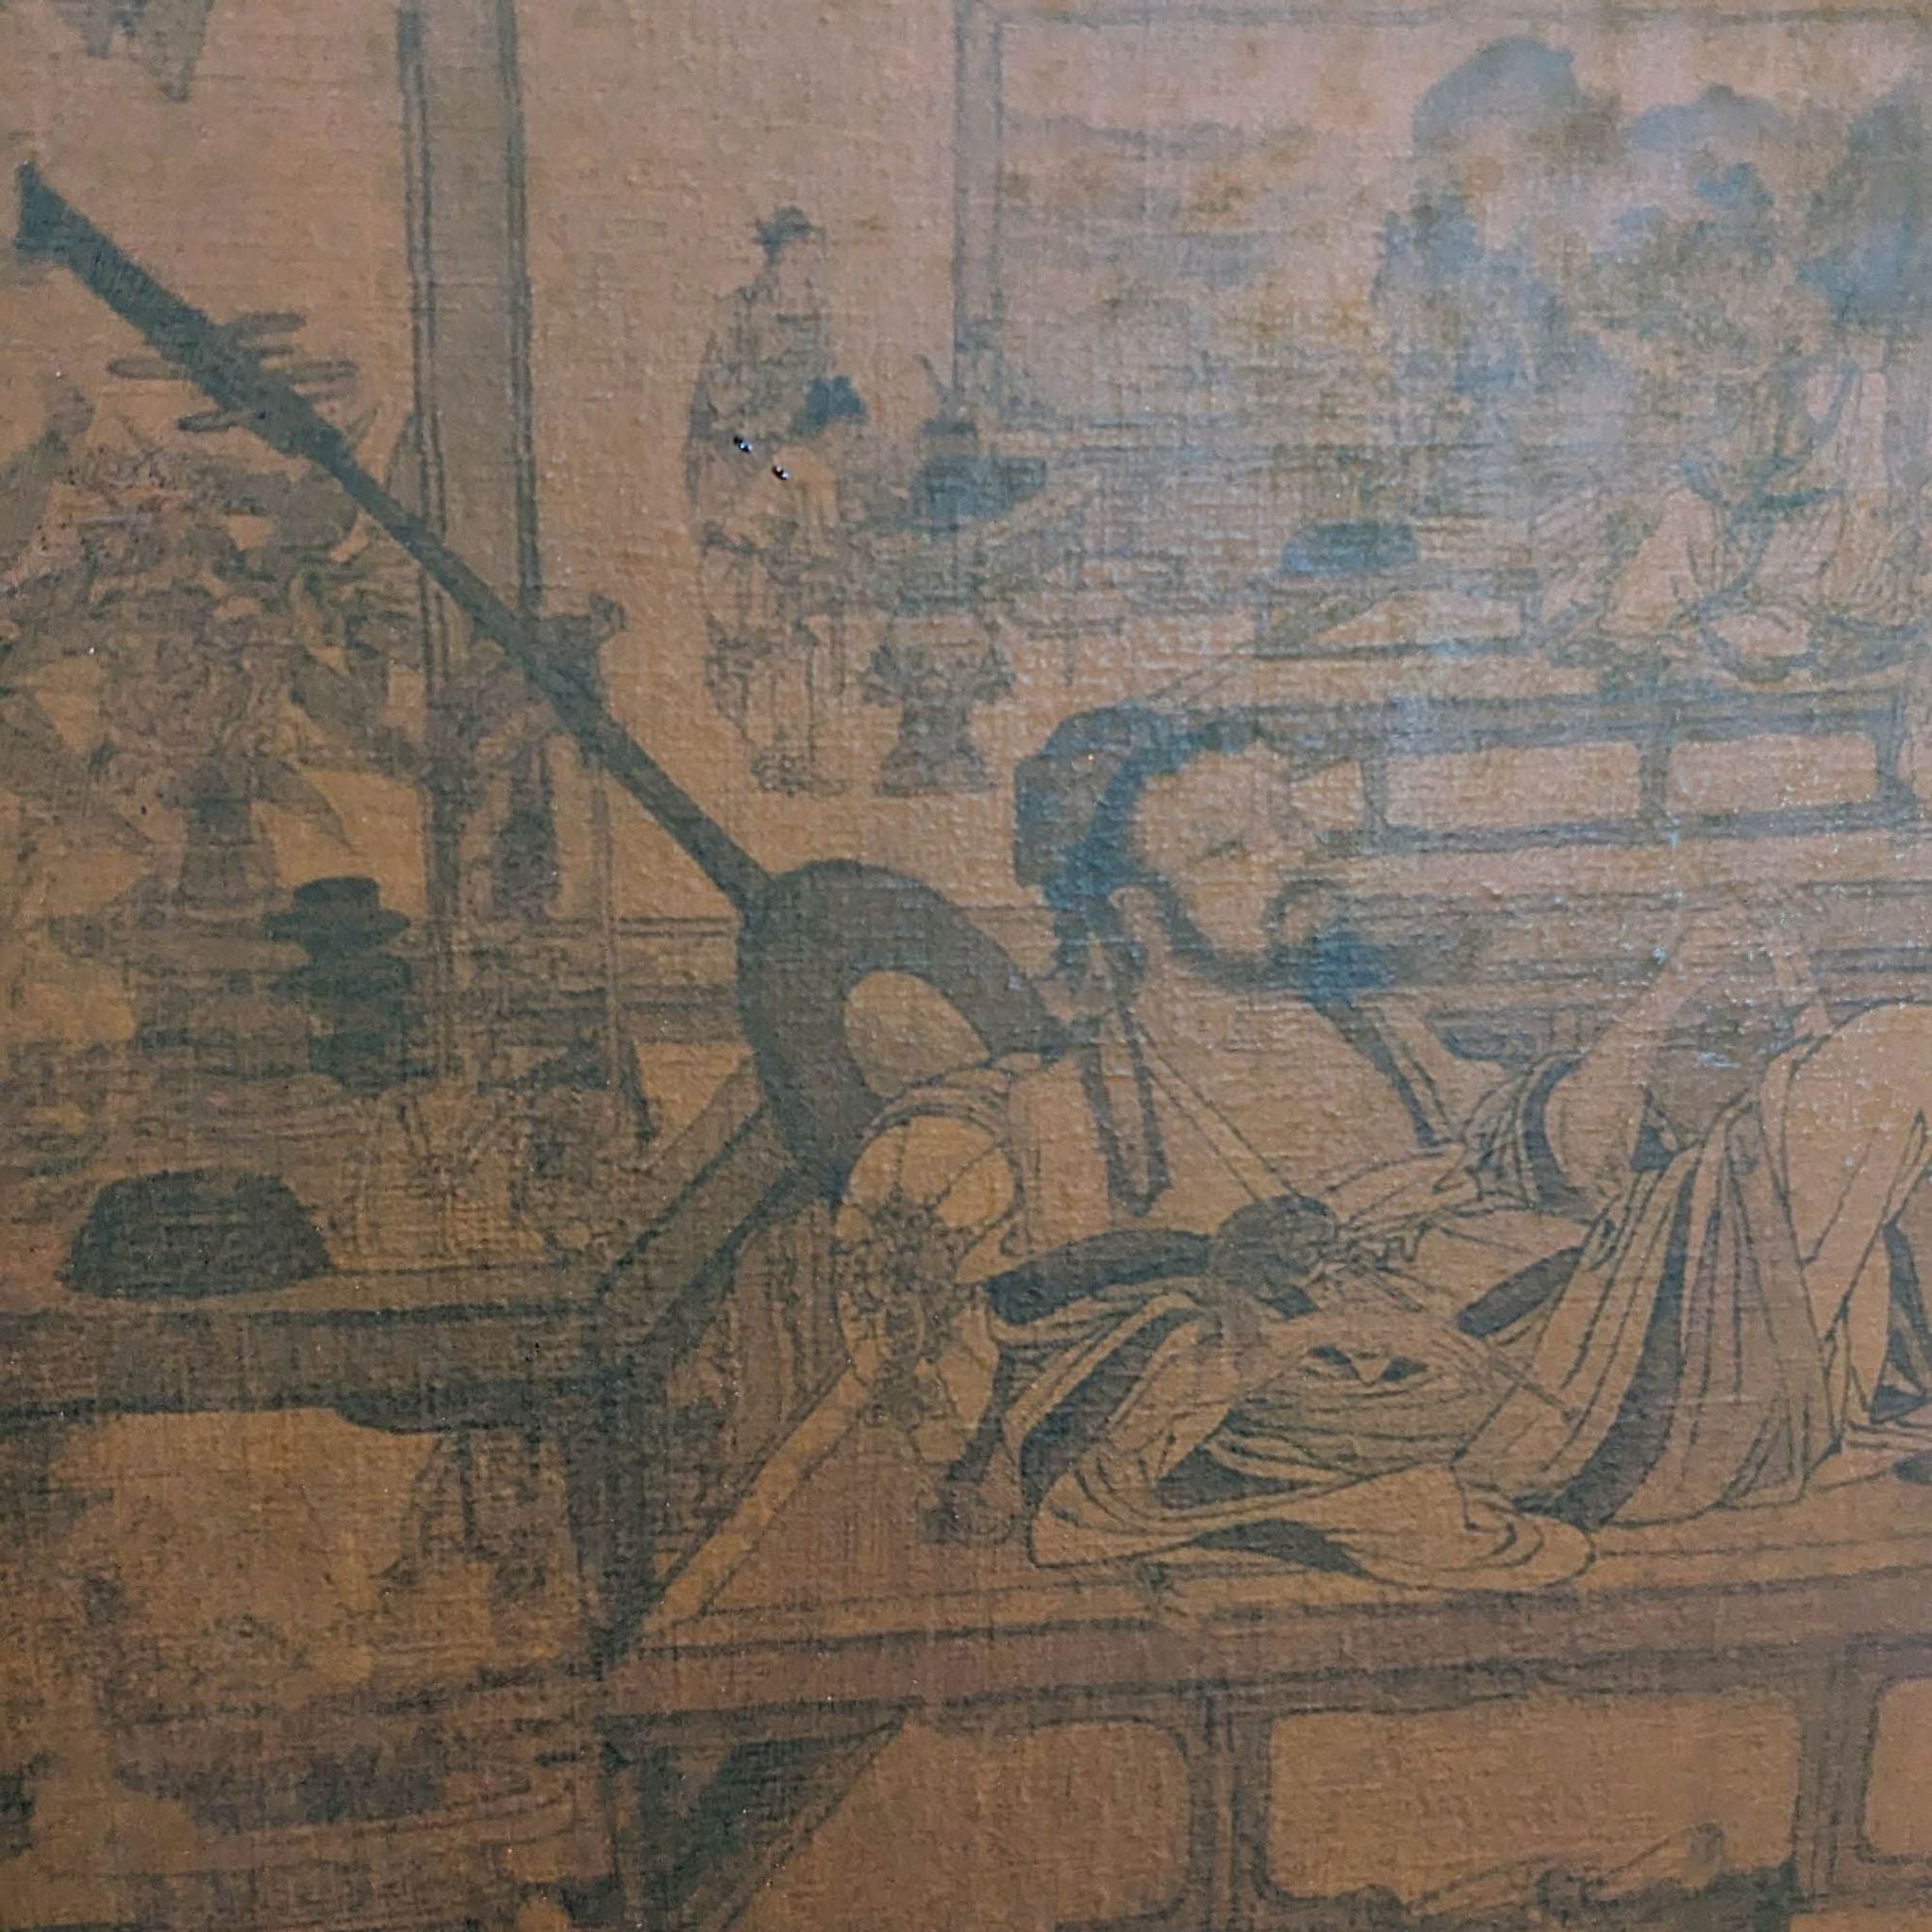 Alt text 2: Close-up of a Reperch painting depicting traditional Asian scenes in sepia tones, signed by the artist, with focused details on historical figures.